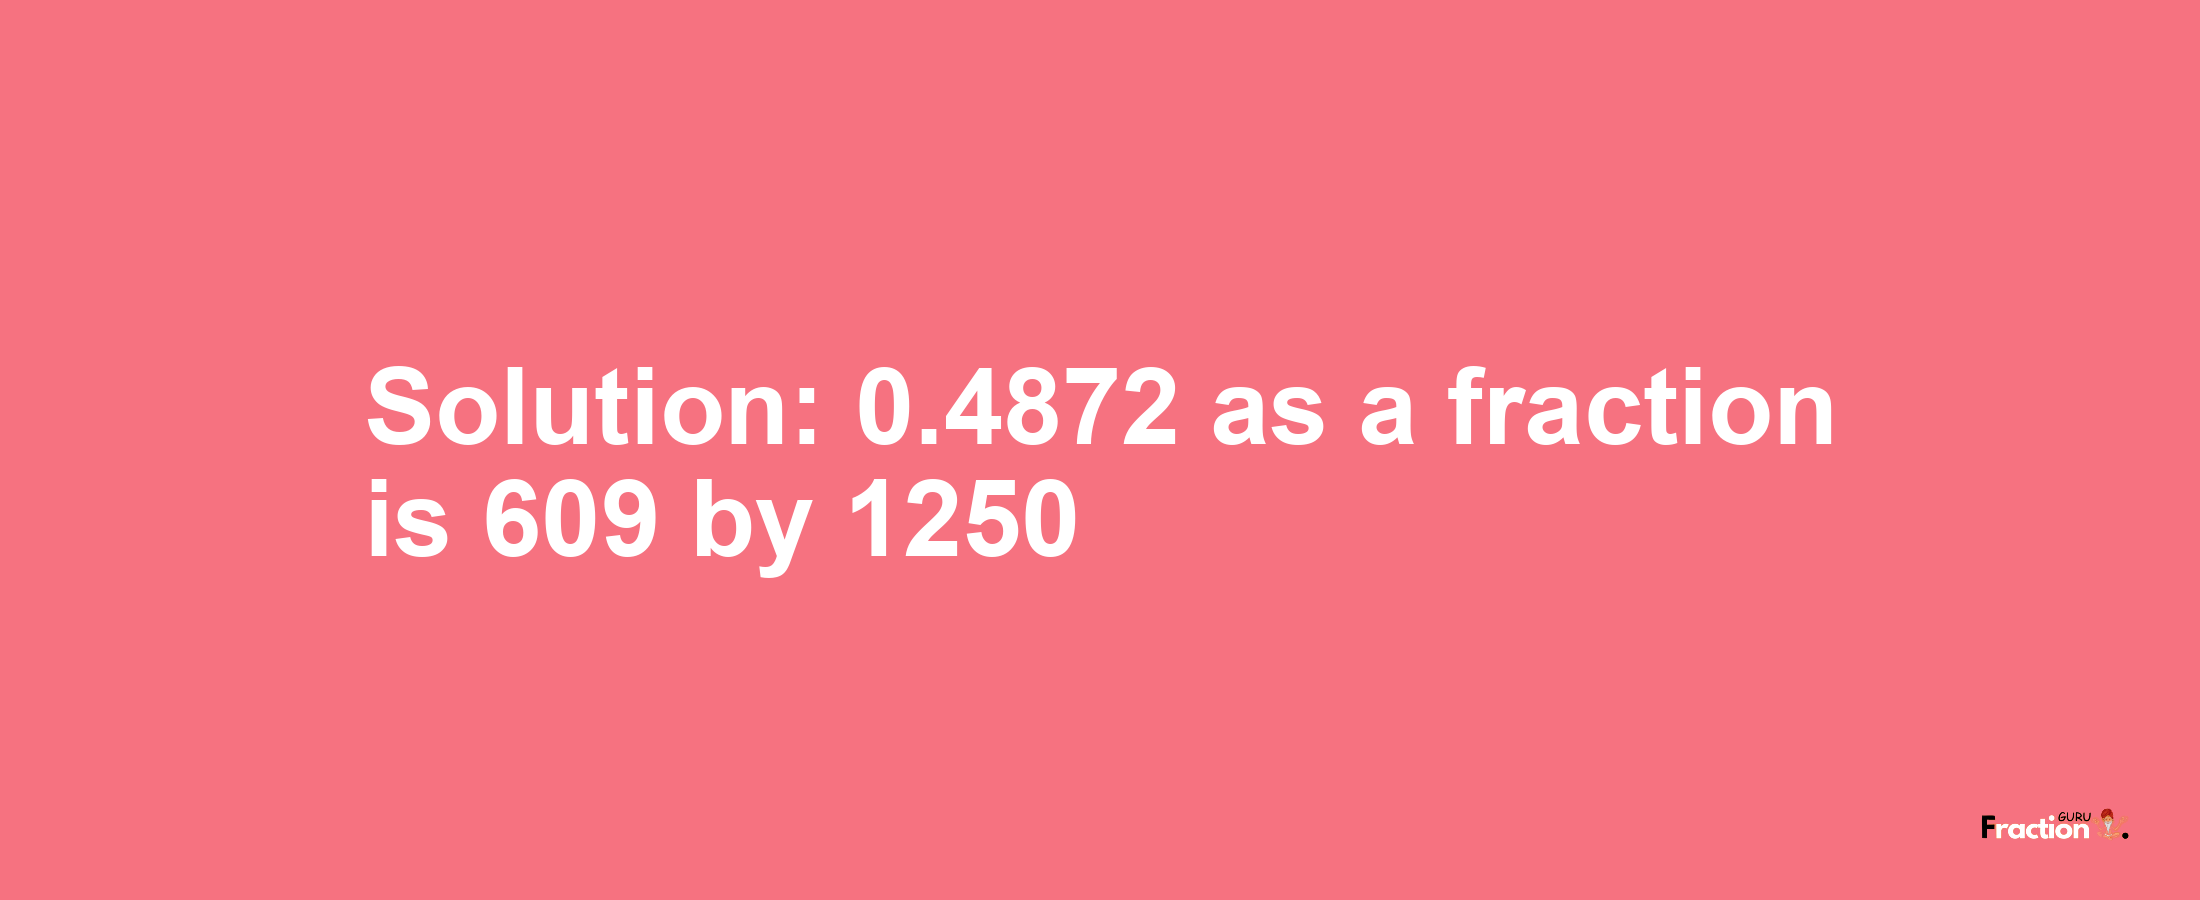 Solution:0.4872 as a fraction is 609/1250